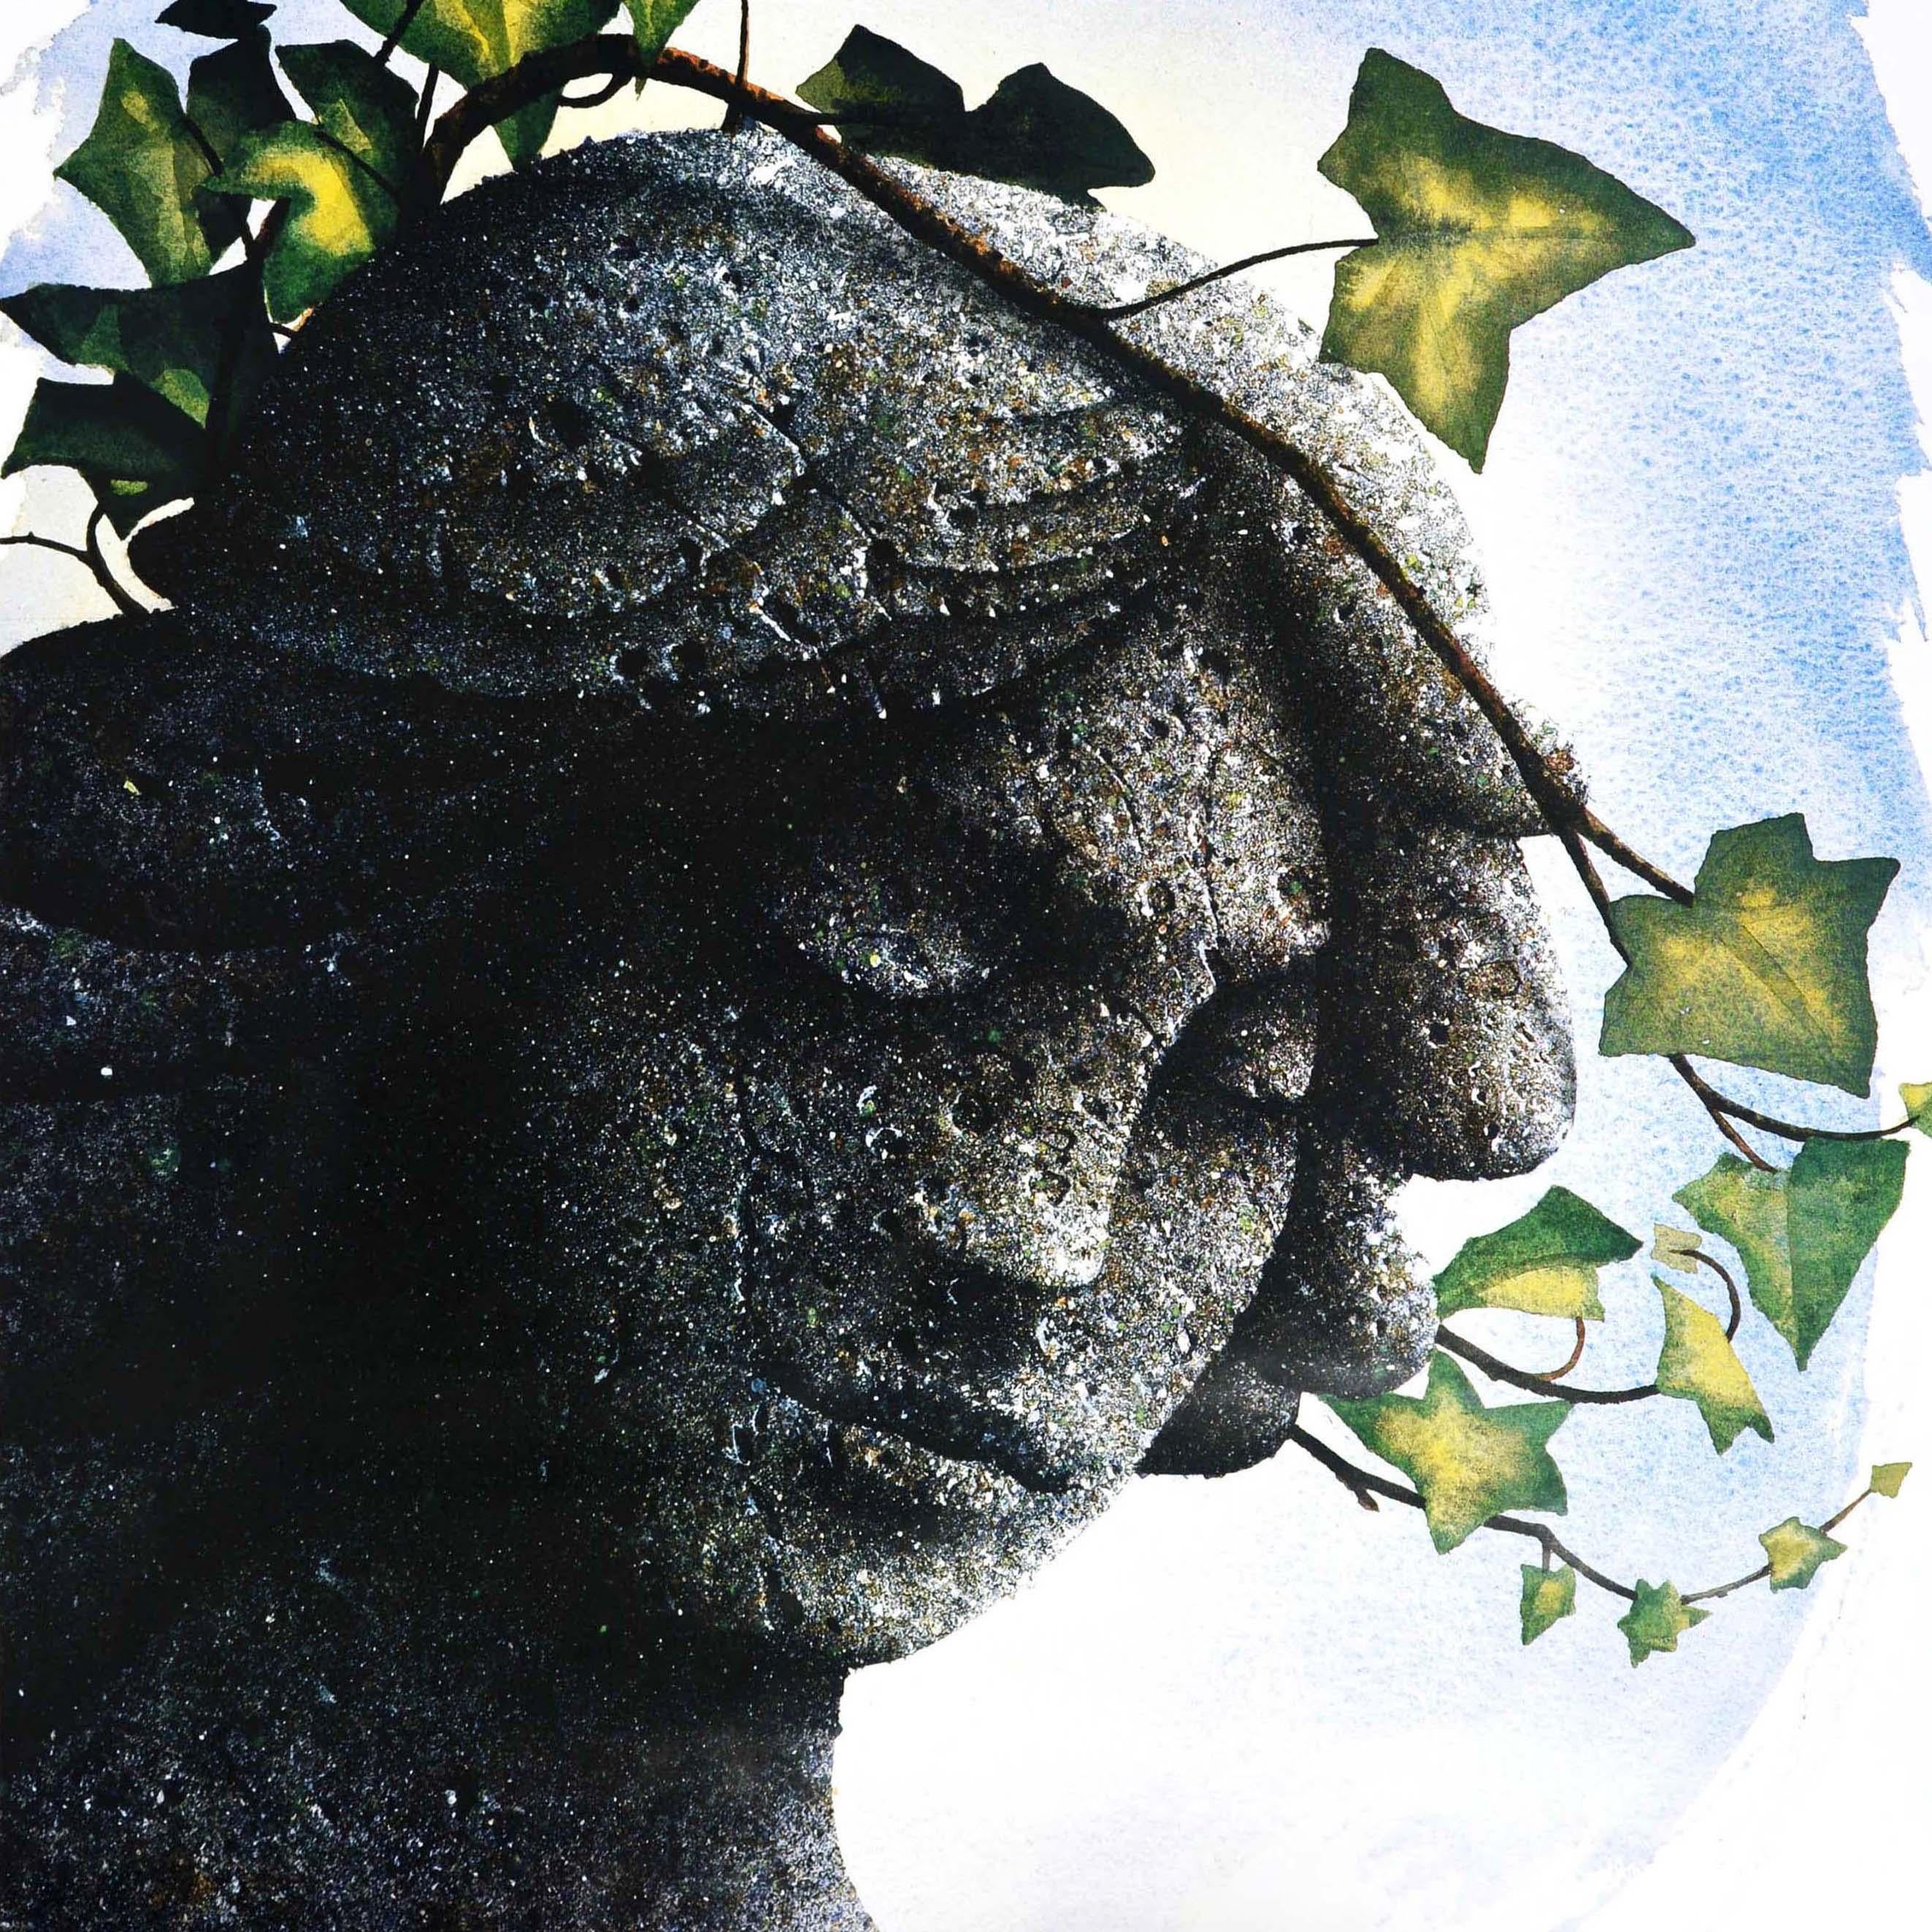 Original vintage London Underground poster for Highgate cemetery swains lane N6 nearest station Archway. Stunning artwork depicting a peaceful headstone of an angel lady with her eyes closed and ivy on her head in front of a blue watercolor paint